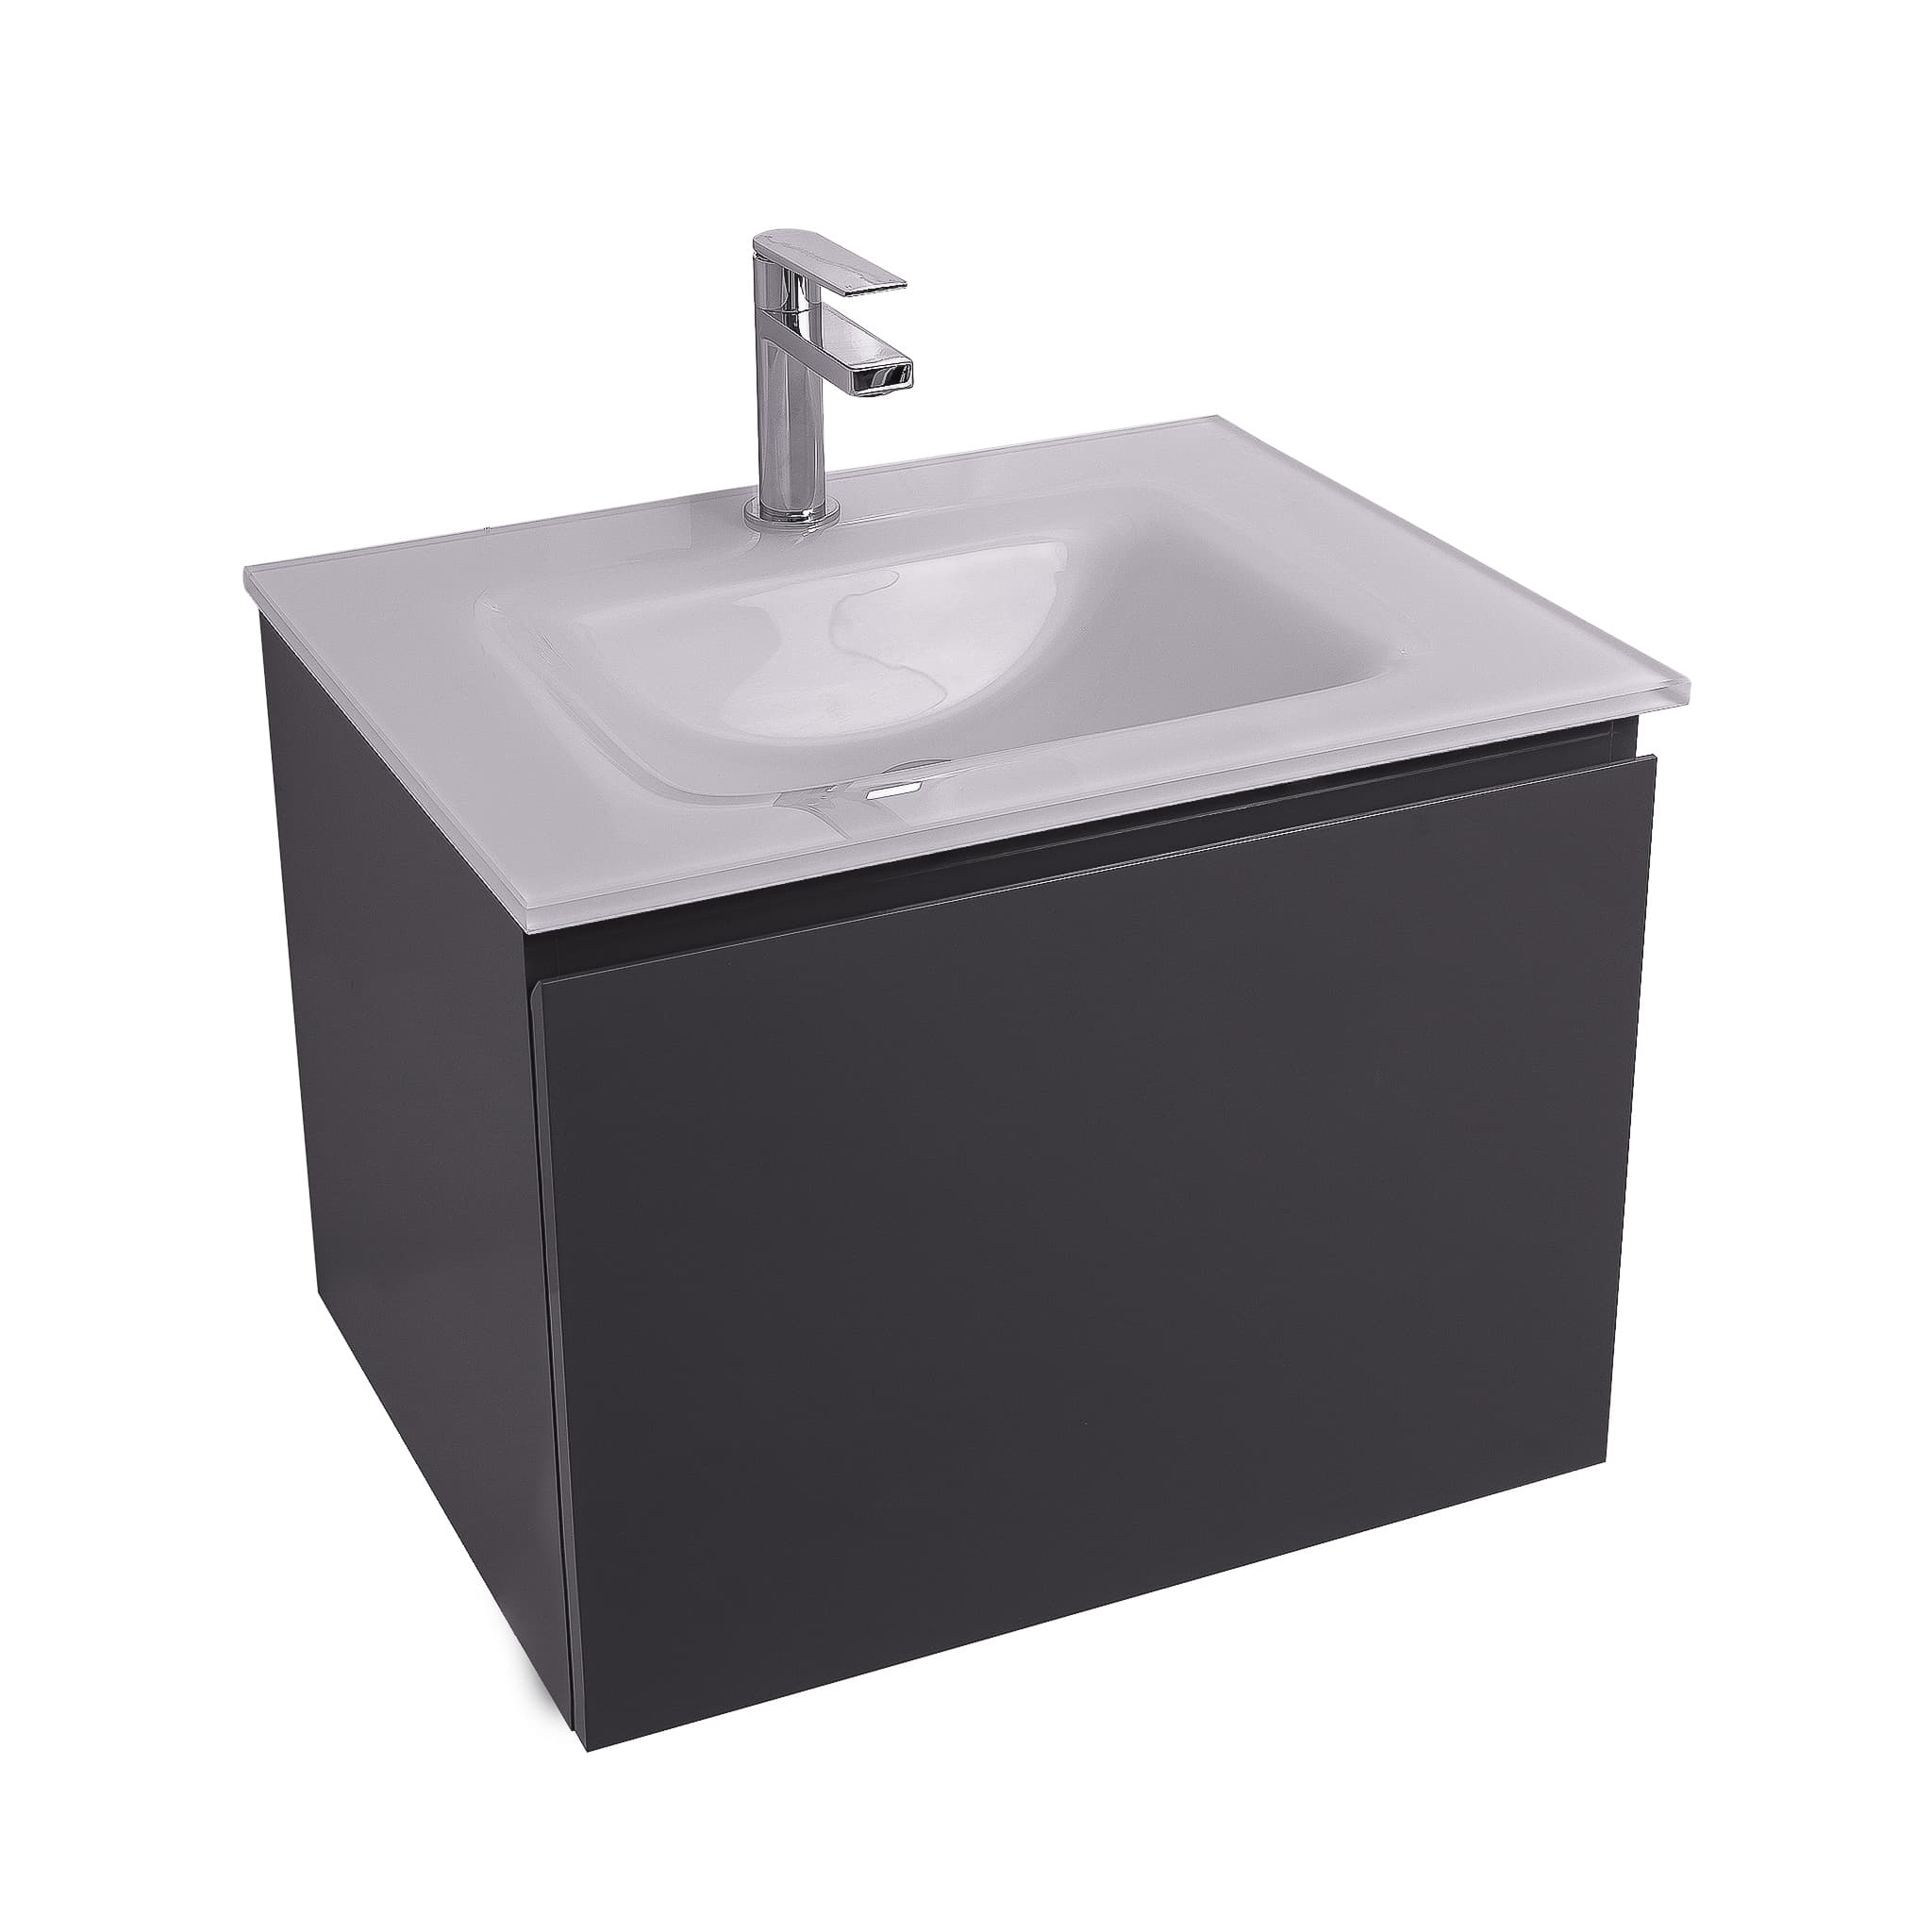 Venice 23.5 Anthracite High Gloss Cabinet, White Tempered Glass Sink, Wall Mounted Modern Vanity Set